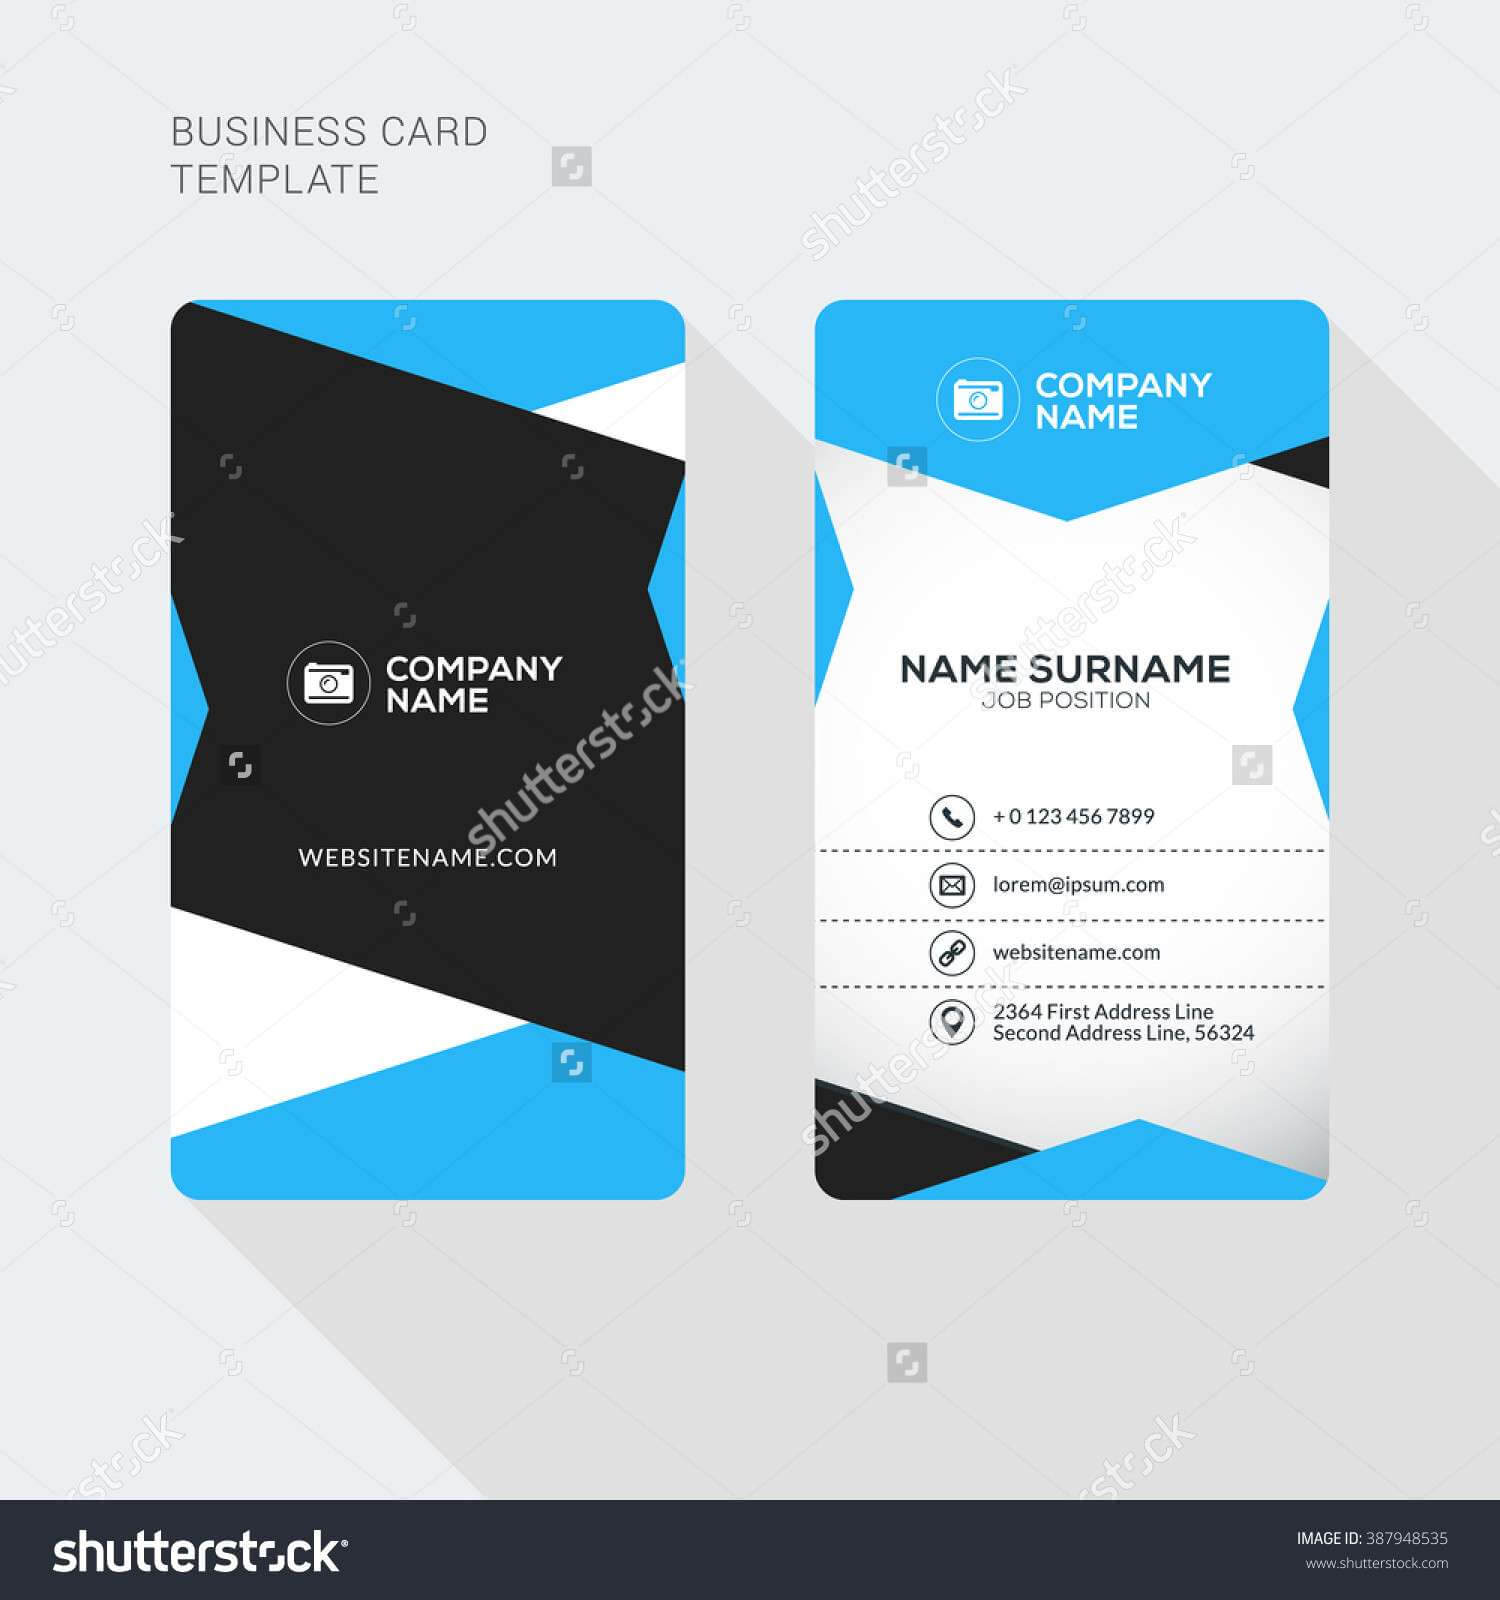 2 Sided Business Card Template Word – Caquetapositivo Intended For 2 Sided Business Card Template Word